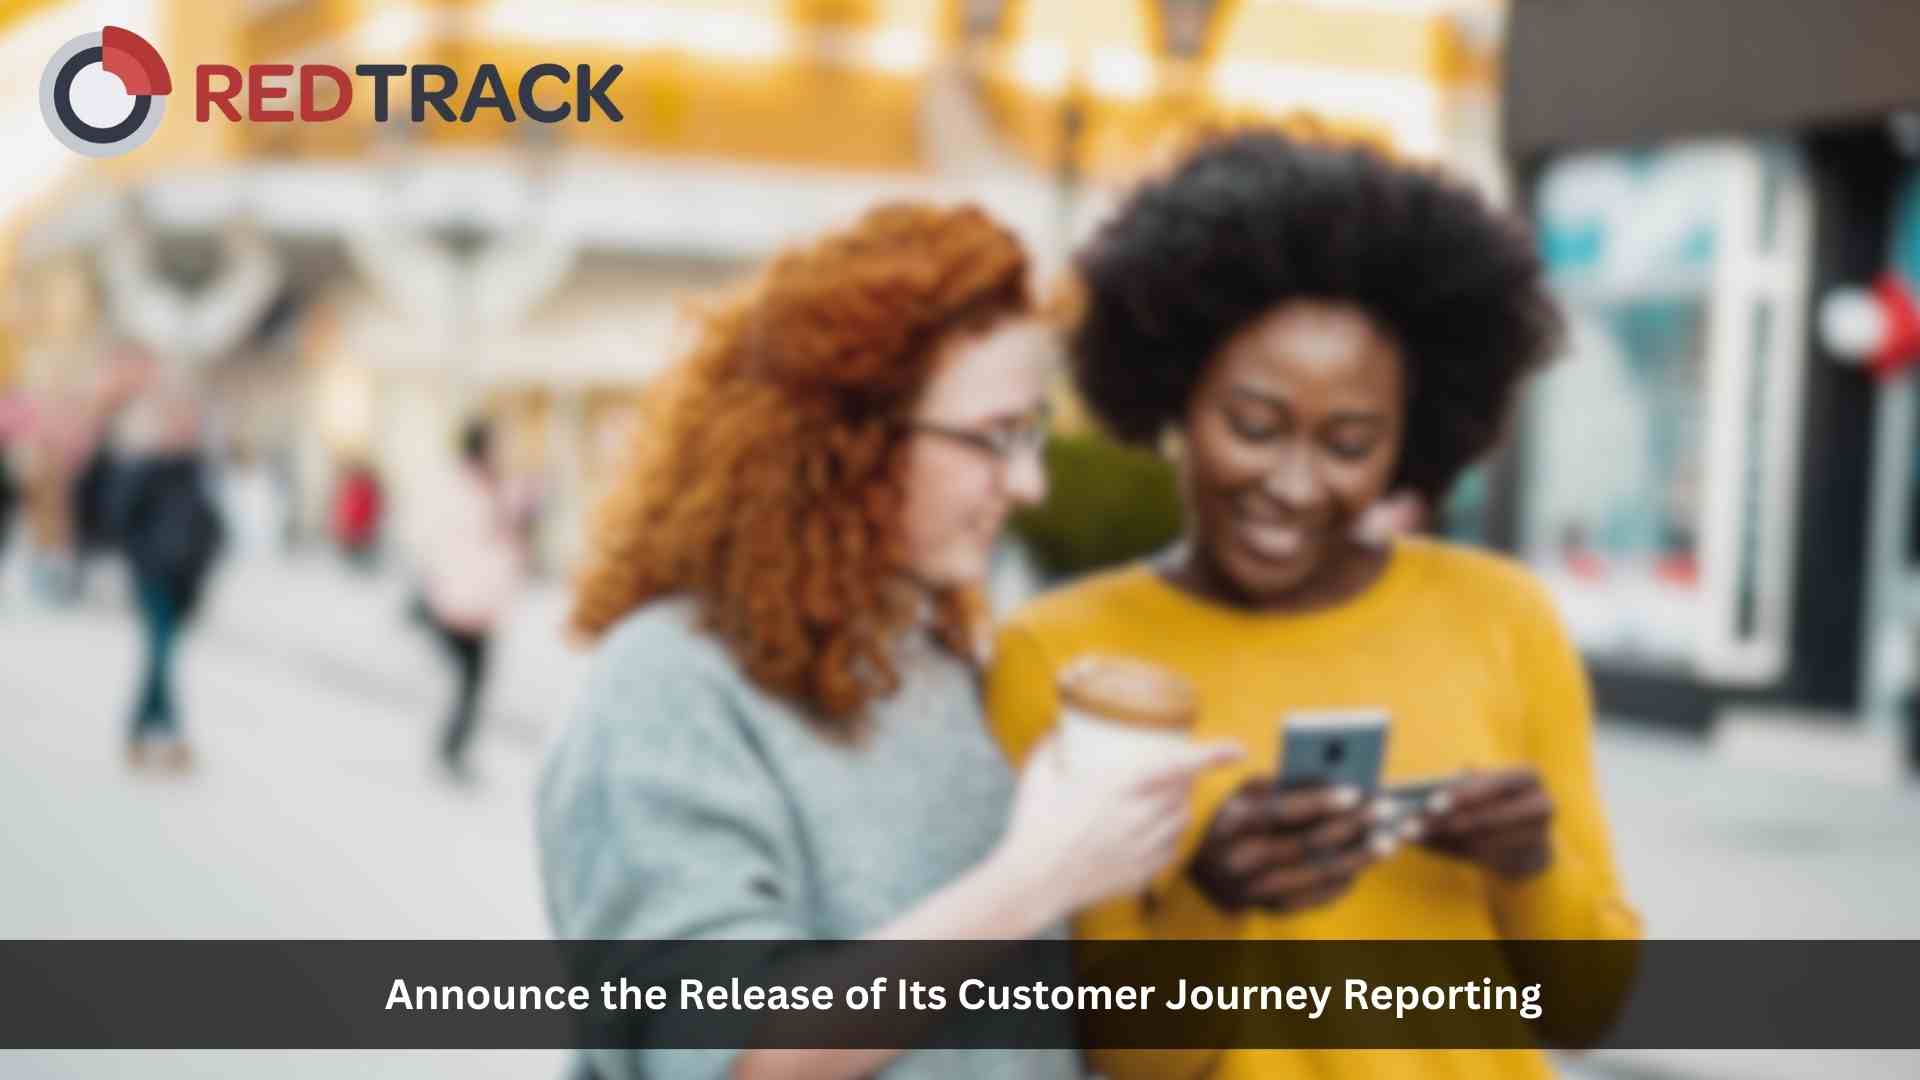 RedTrack Adds Customer Journey Reporting to Complete an All-In-One Solution for e-Commerce Analytics & Automation